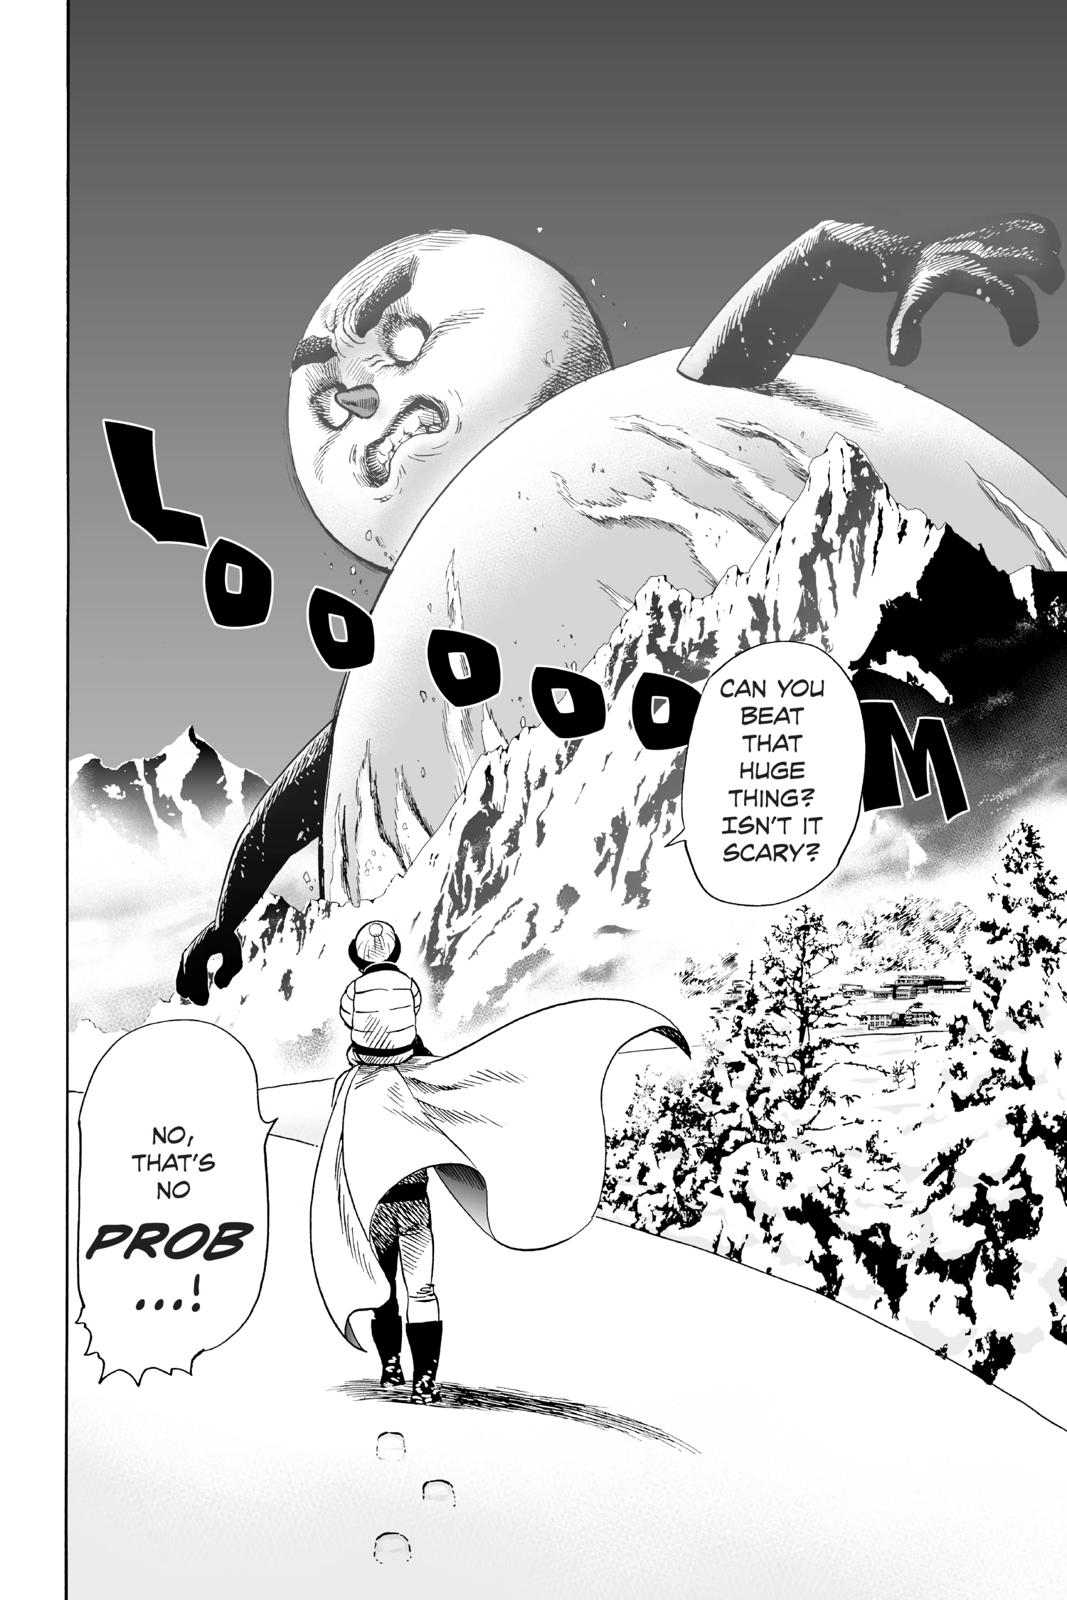 One-Punch Man, Punch 8.5 image 21